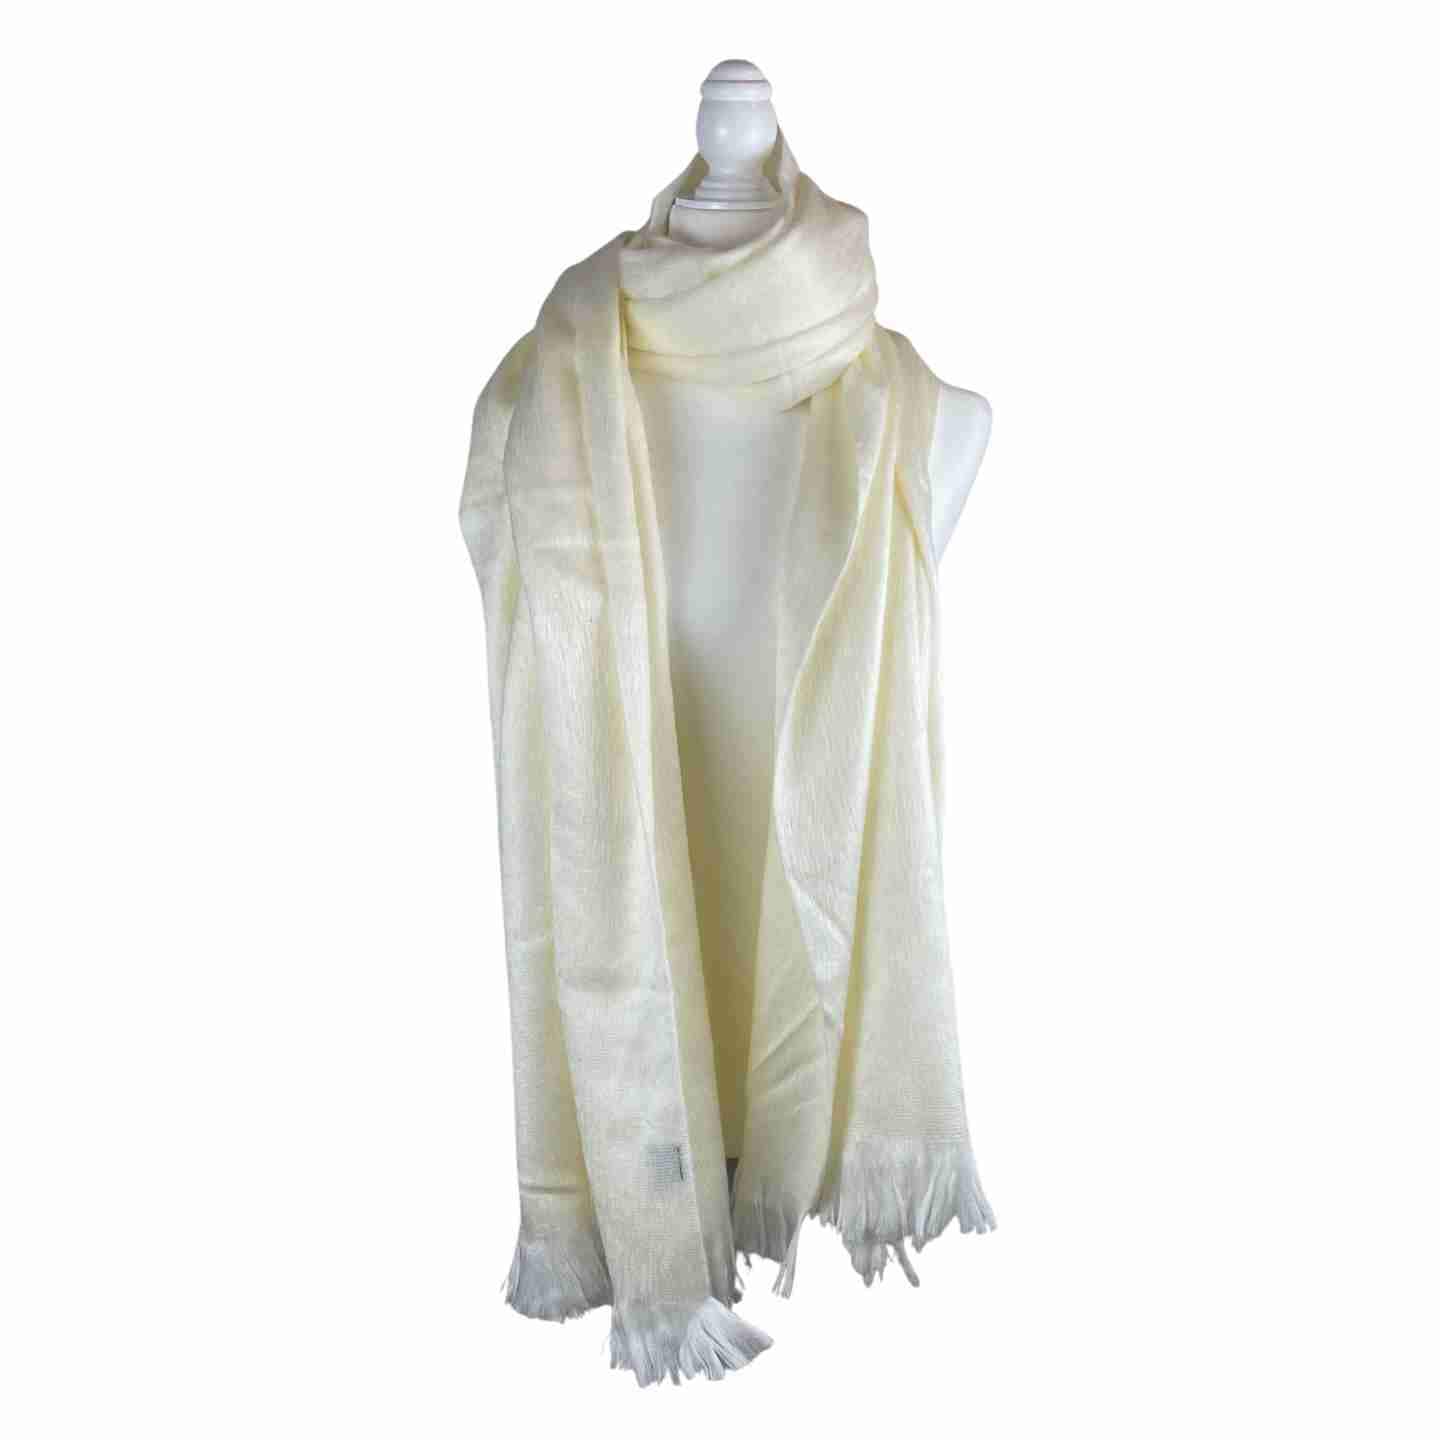 Soft and Warm Shoulder Shawl Wrap | Wedding Cover Up | Ivory